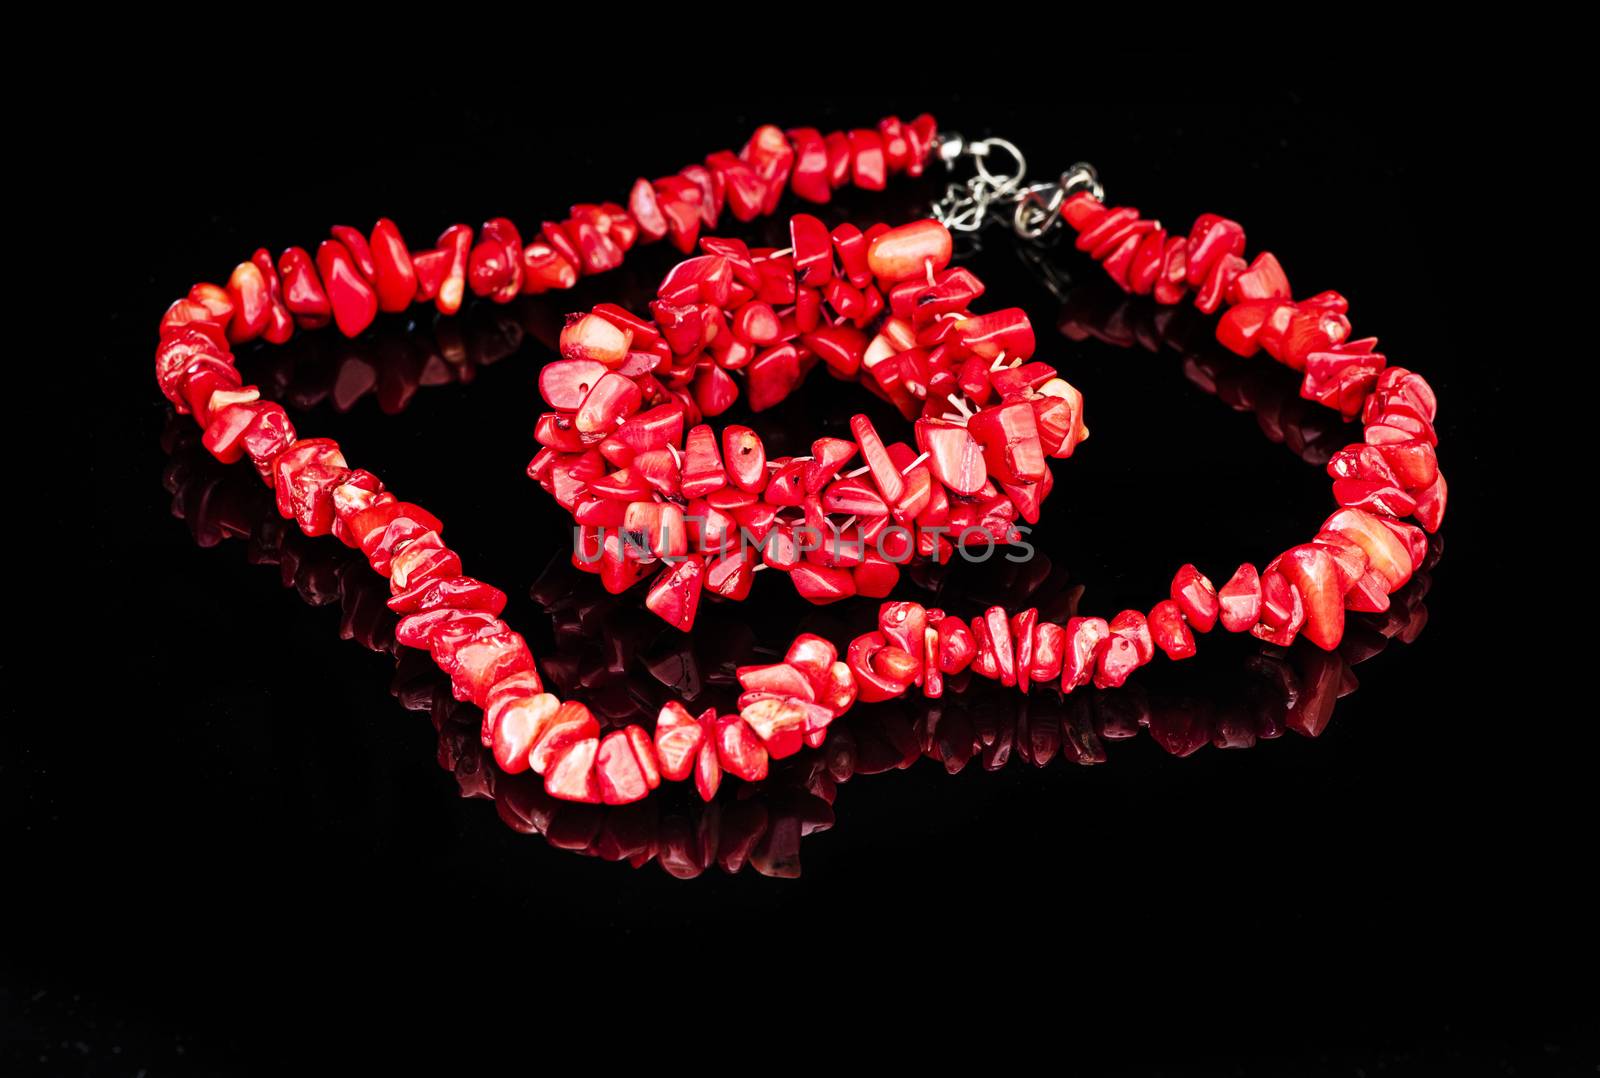 Red coral necklace and bracelet on a black background by fyletto